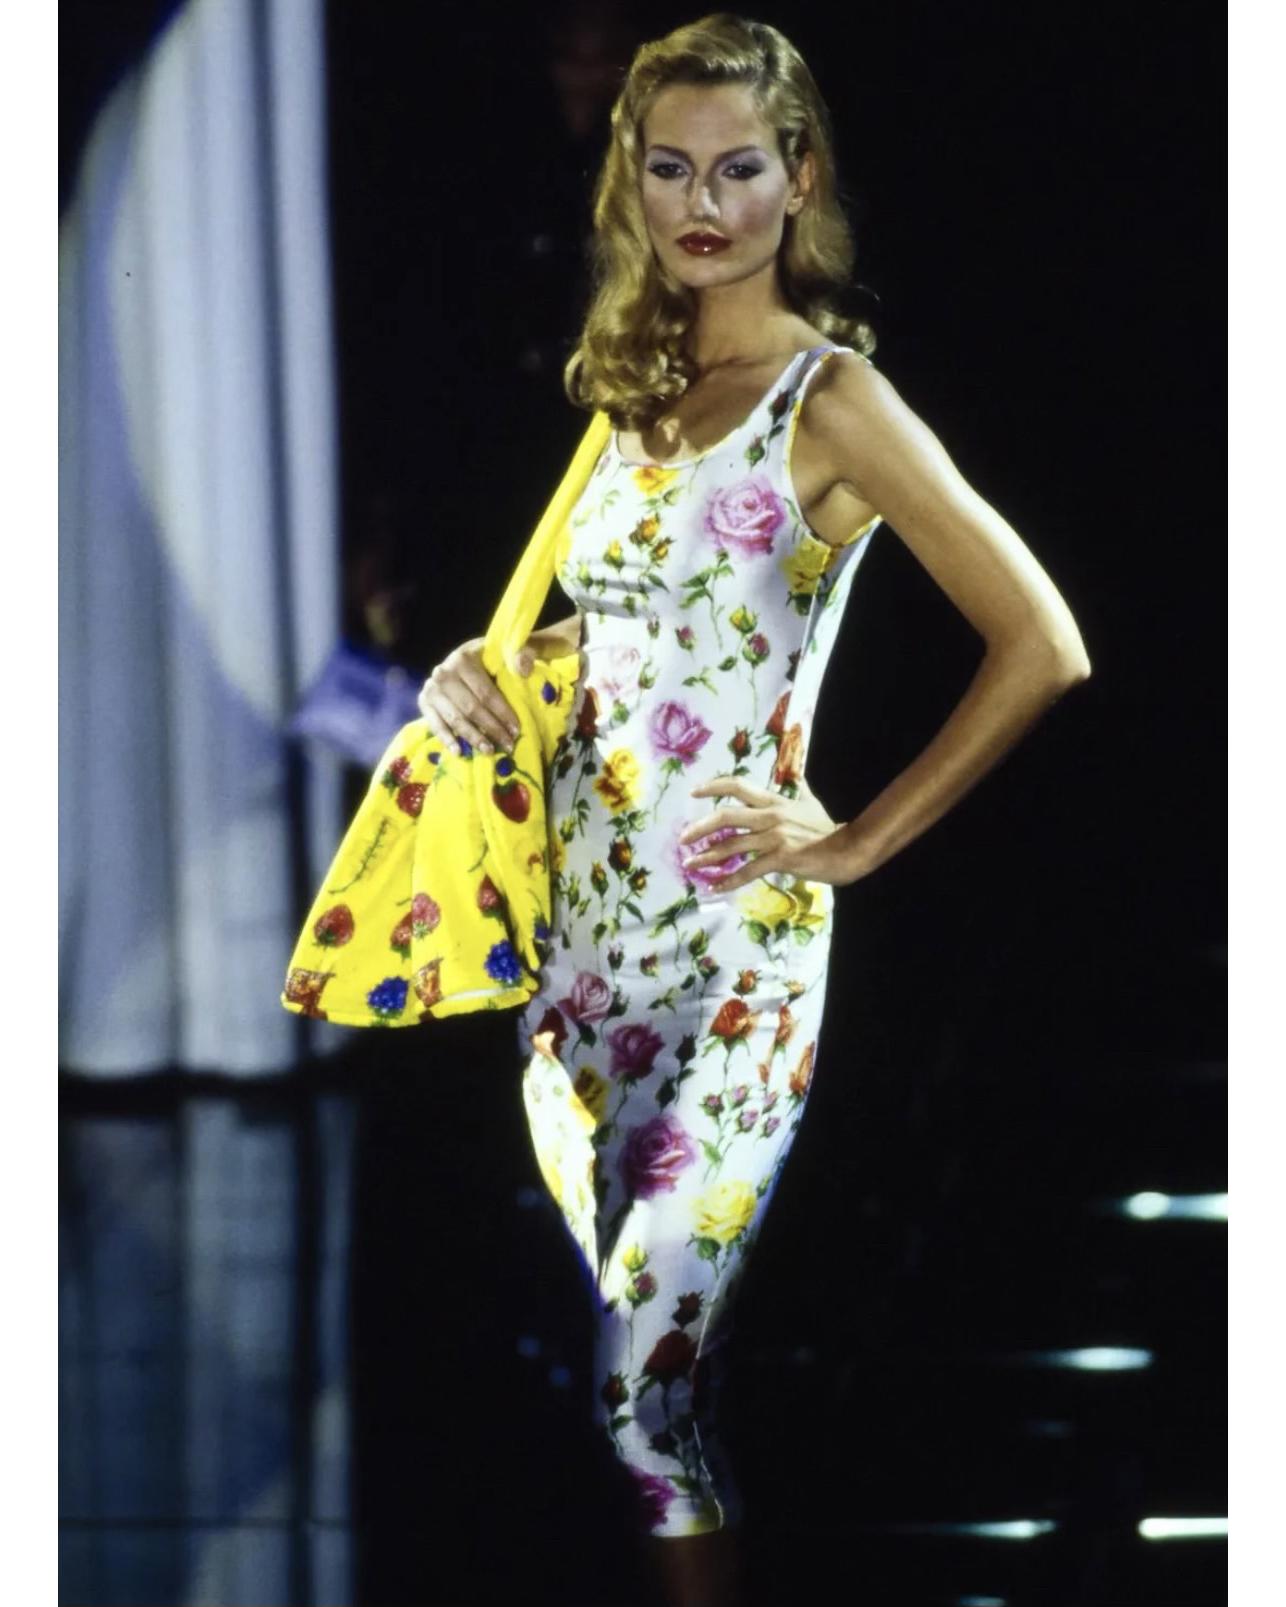 S/S 1995 Gianni Versace white scoop neck midi dress with floral print throughout. Lightweight stretch nylon material, perfect for summer. Concealed side zip closure. As seen on Karen Mulder on the runway. Note: waist measurement stretches up to 13